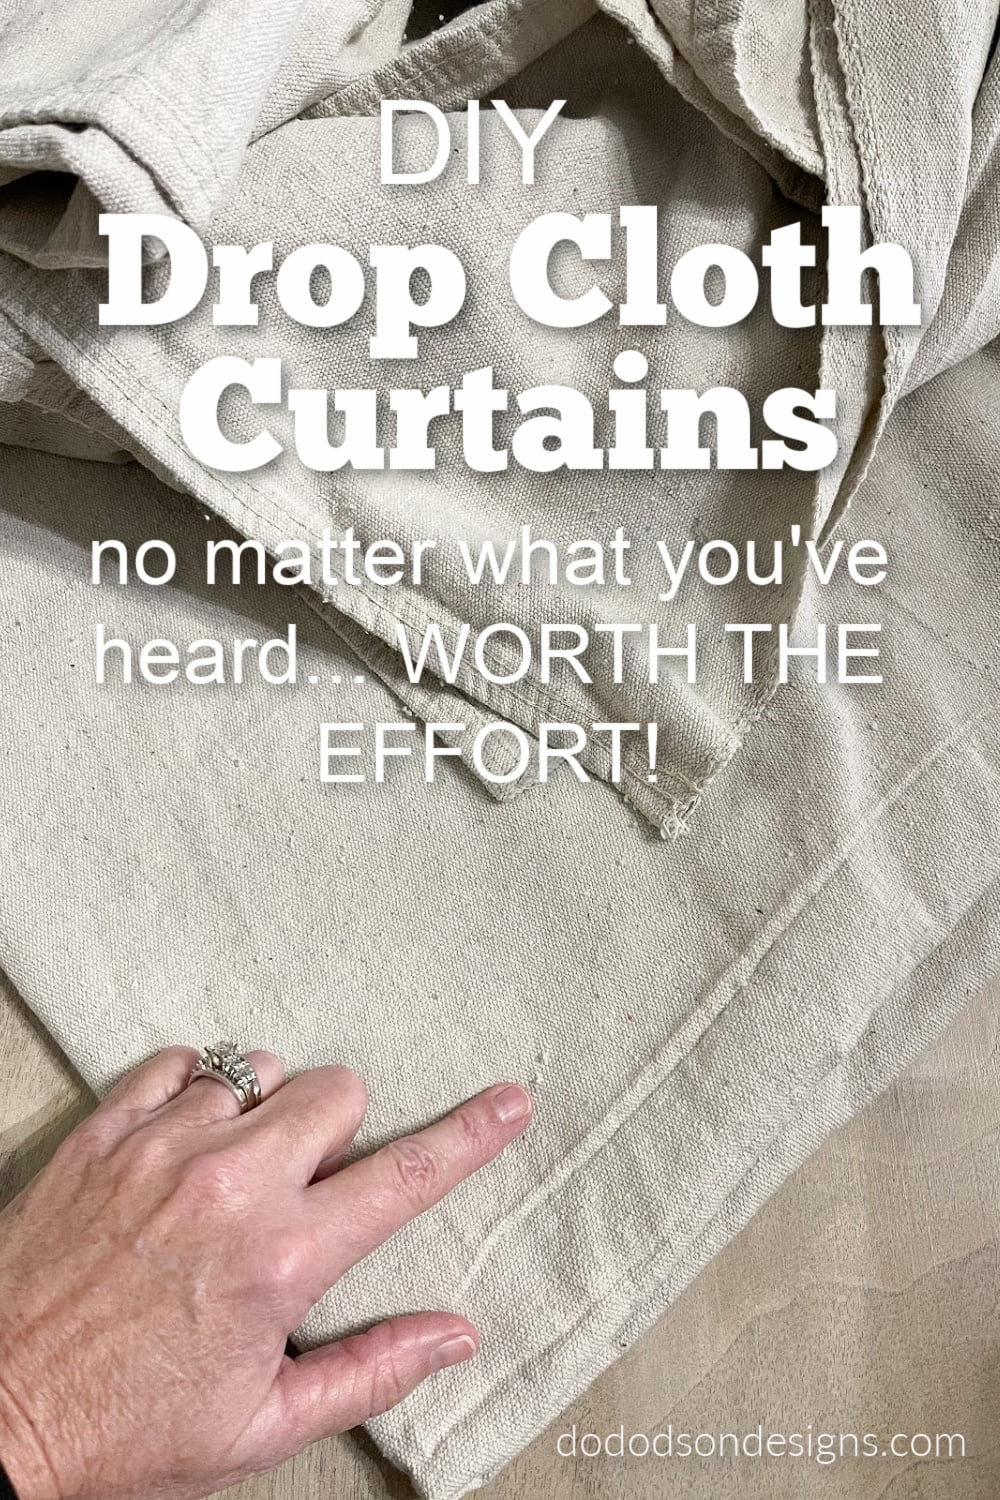 expressing your truth blog: The many ways you can DIY Drape